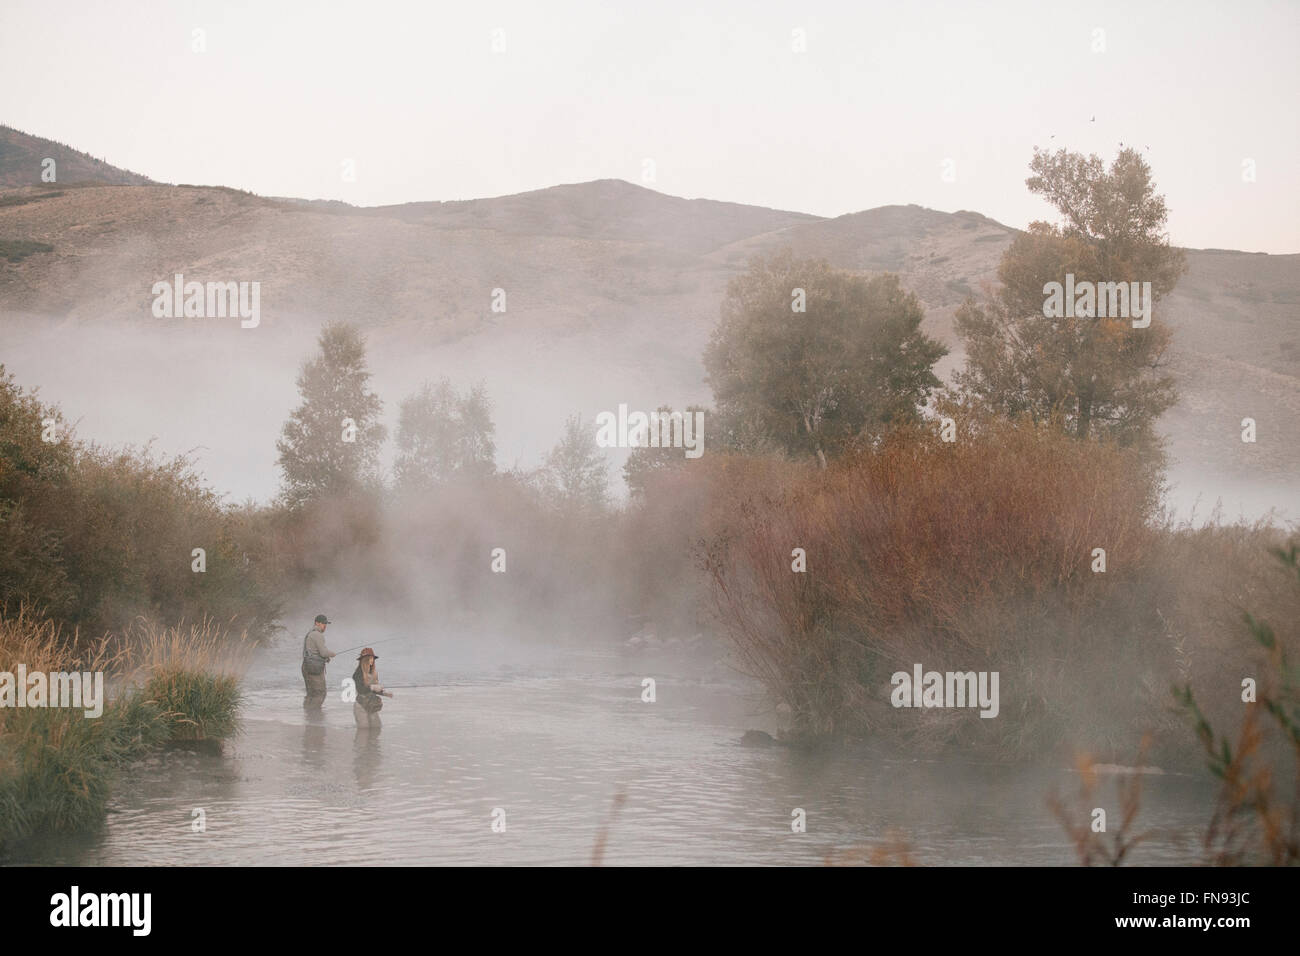 A couple, a man and woman standing in mid stream fly fishing in a river. Stock Photo